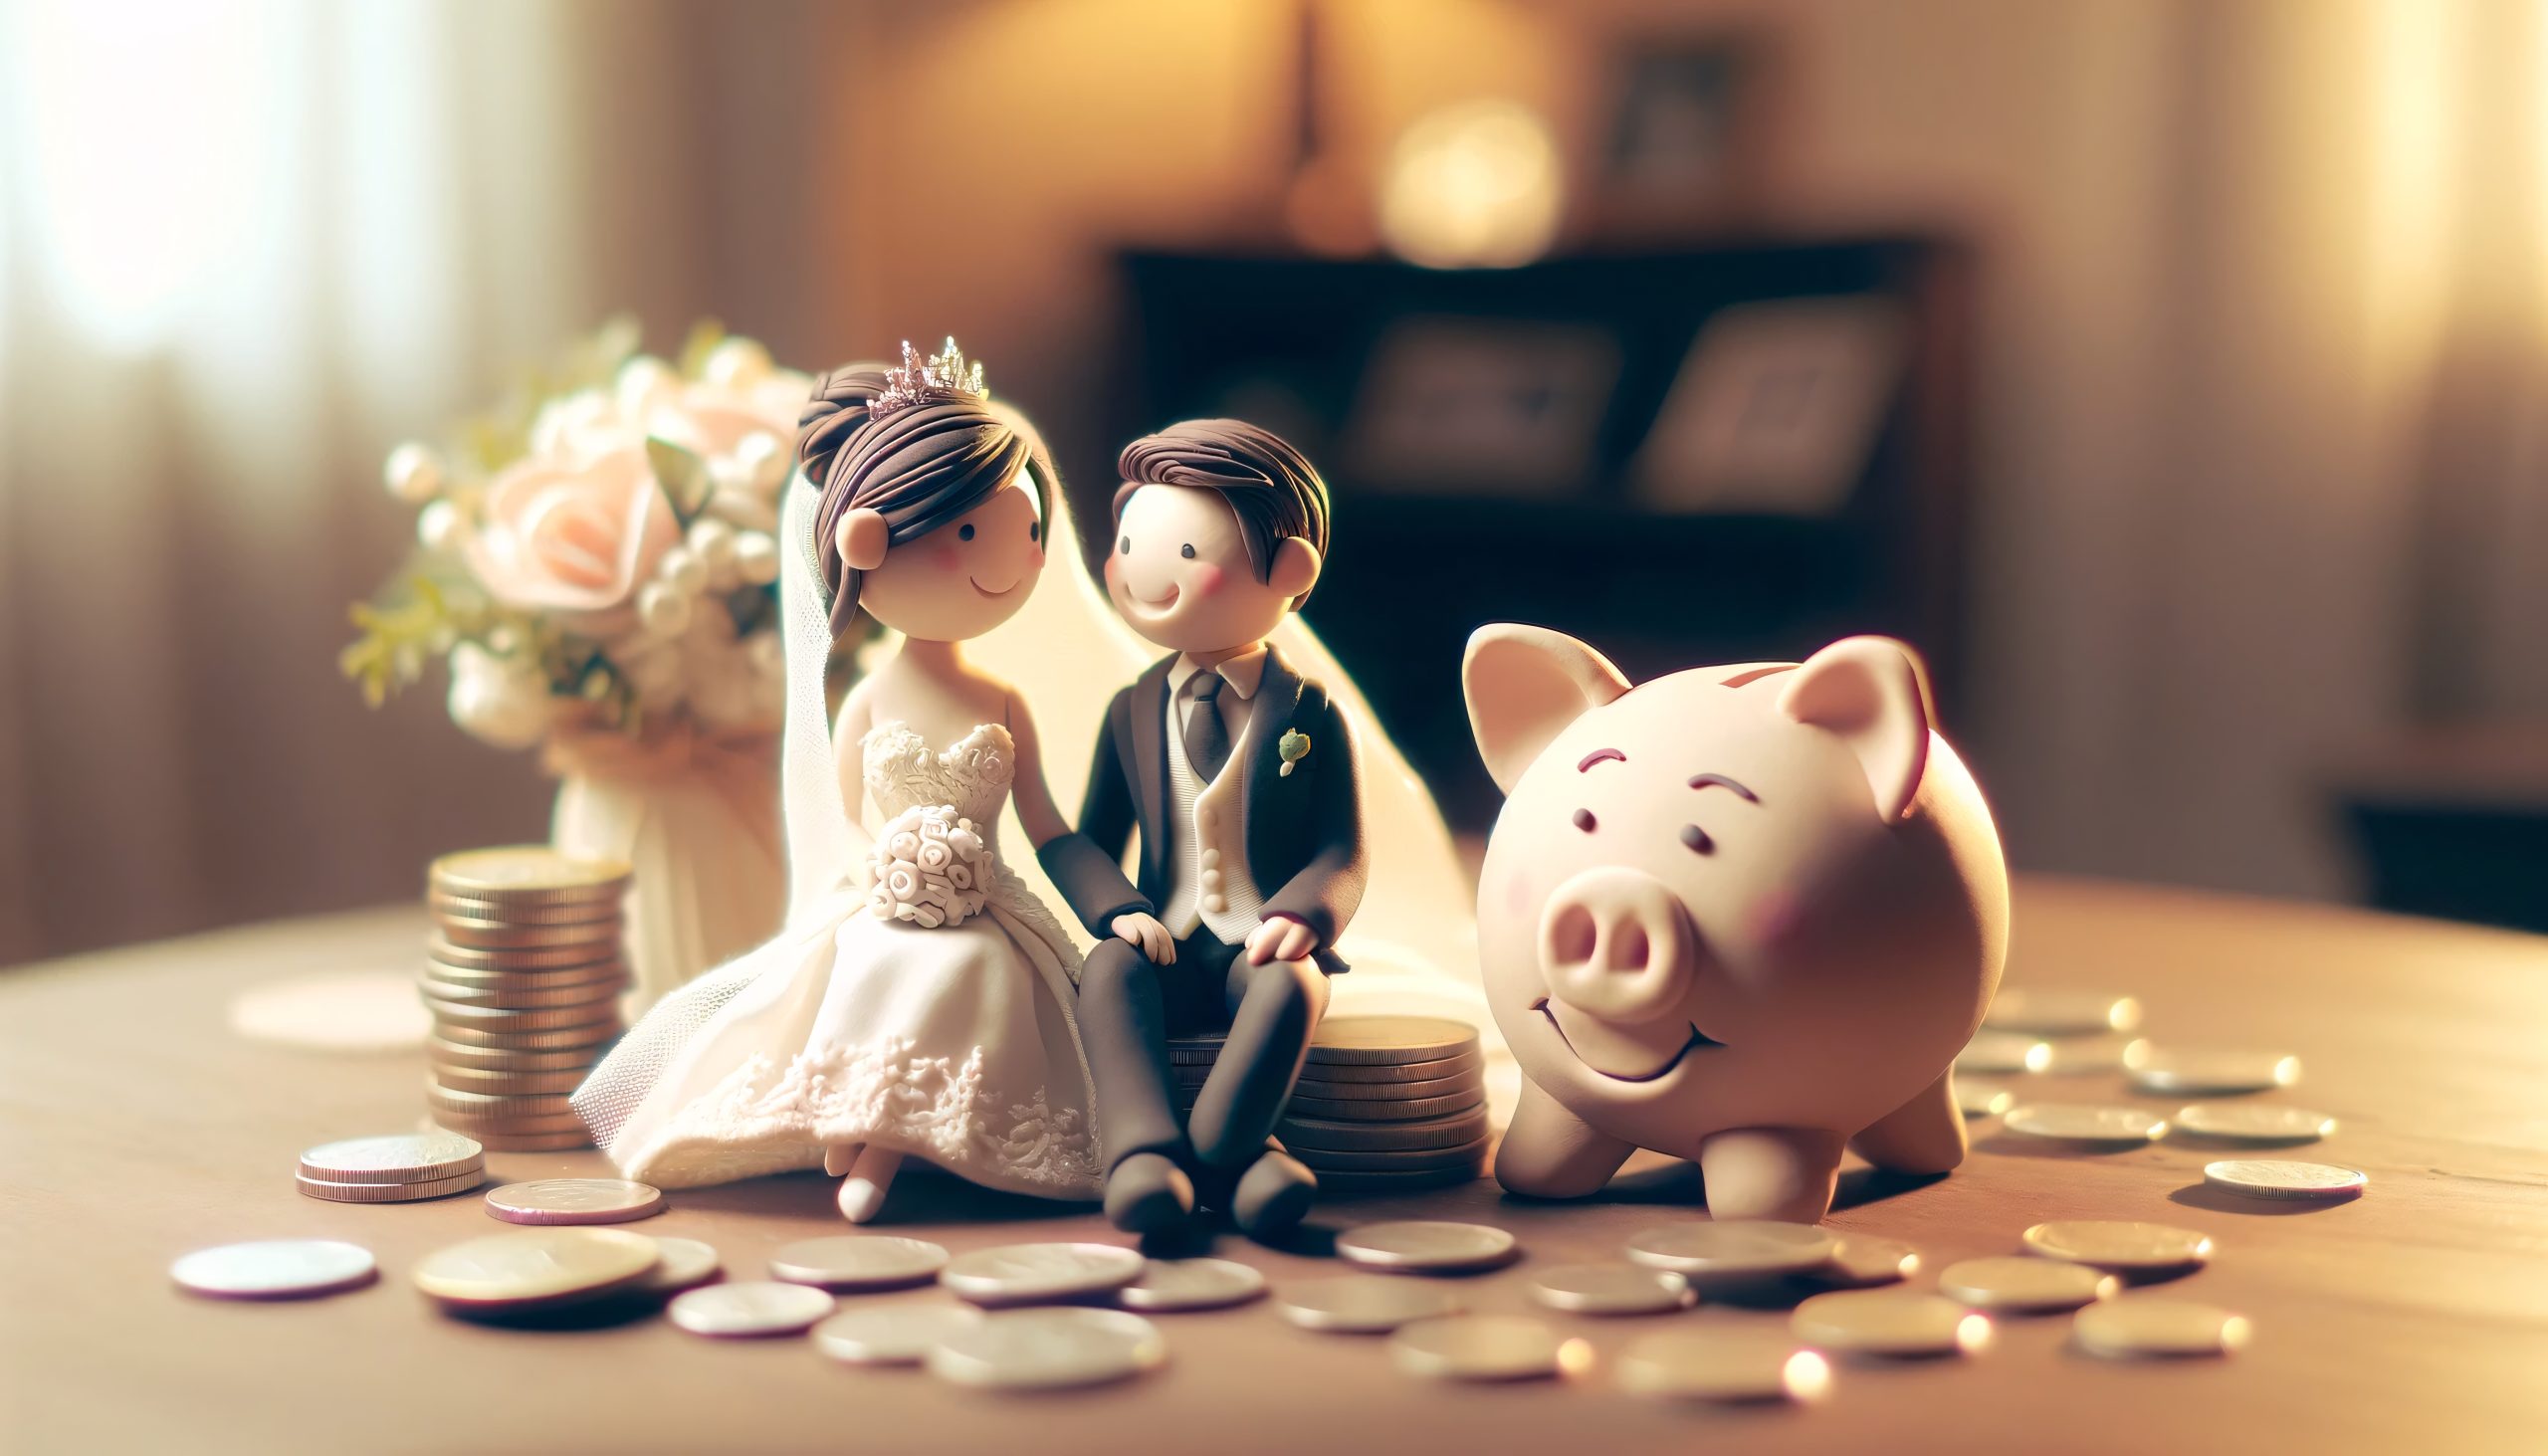 Animation of bride and groom with piggy bank